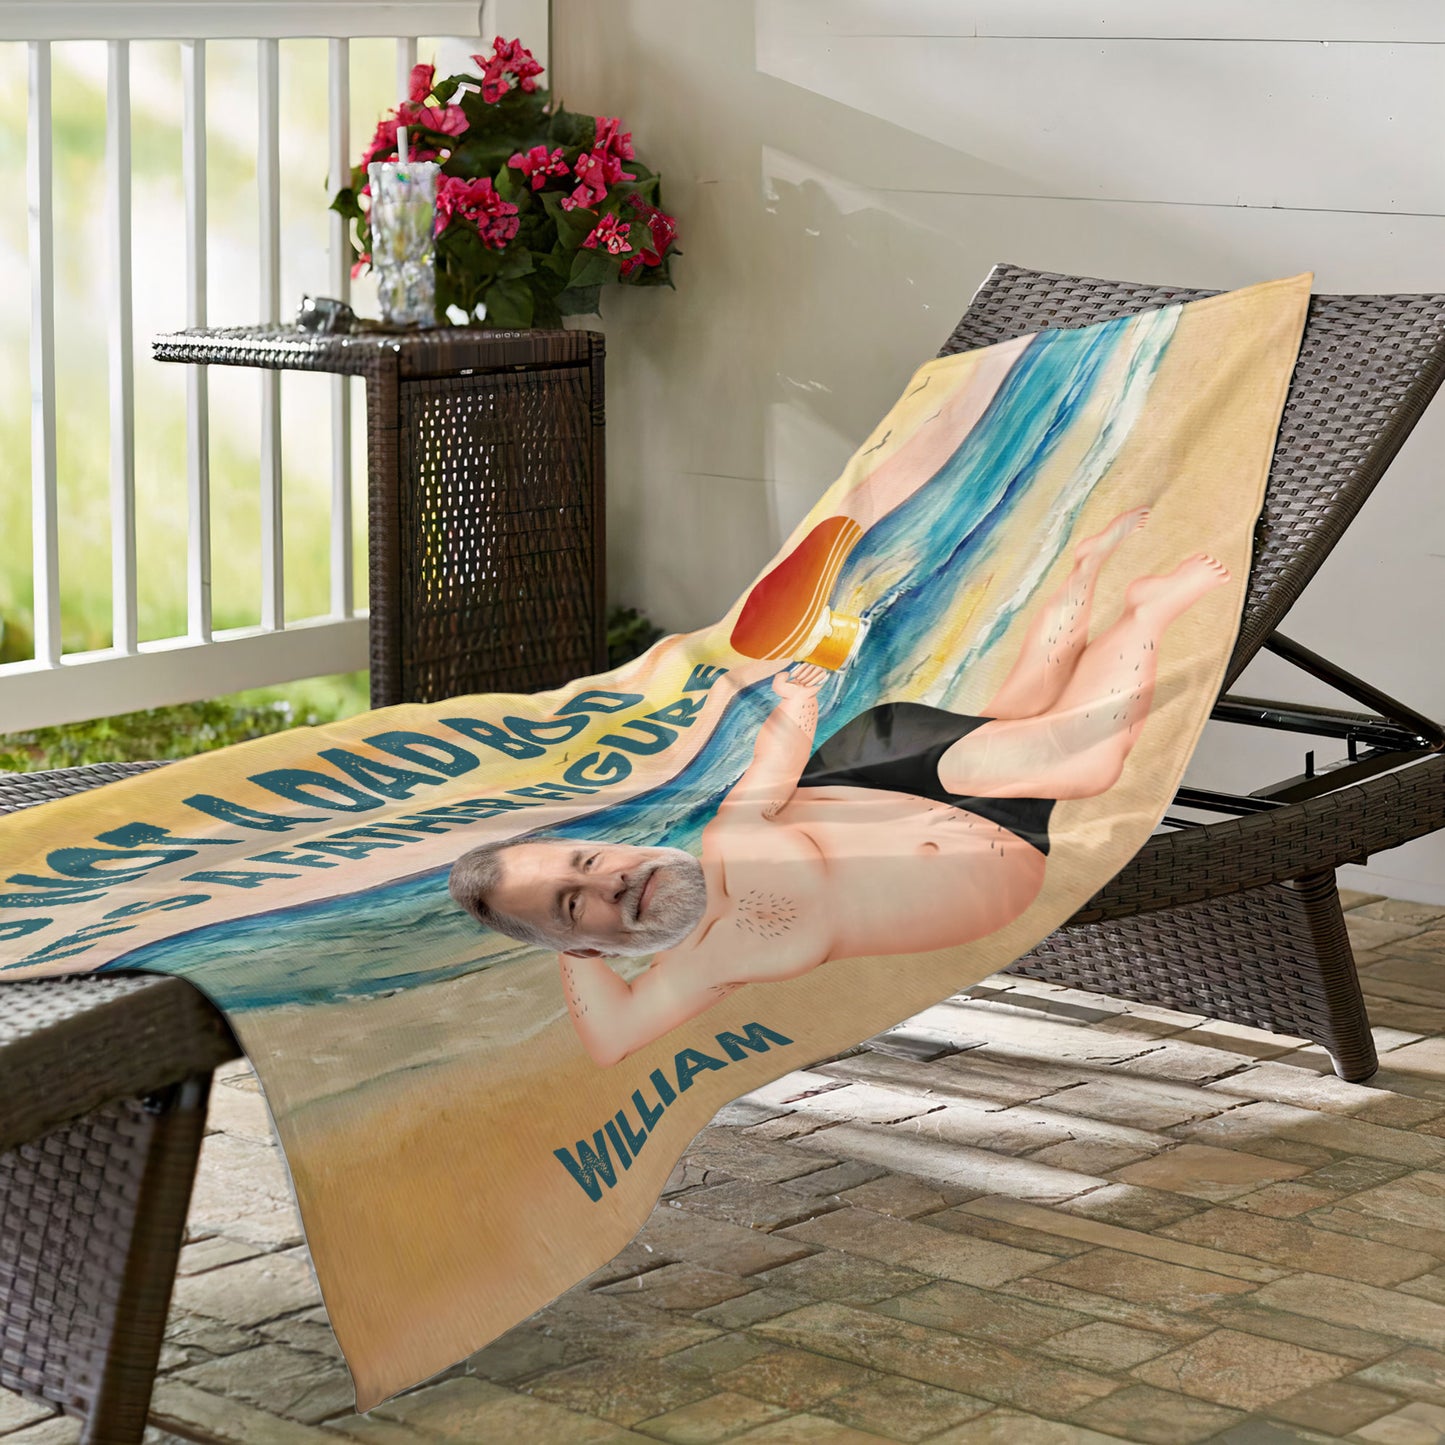 It's Not A Dad Bod It's Father Figure - Personalized Photo Beach Towel